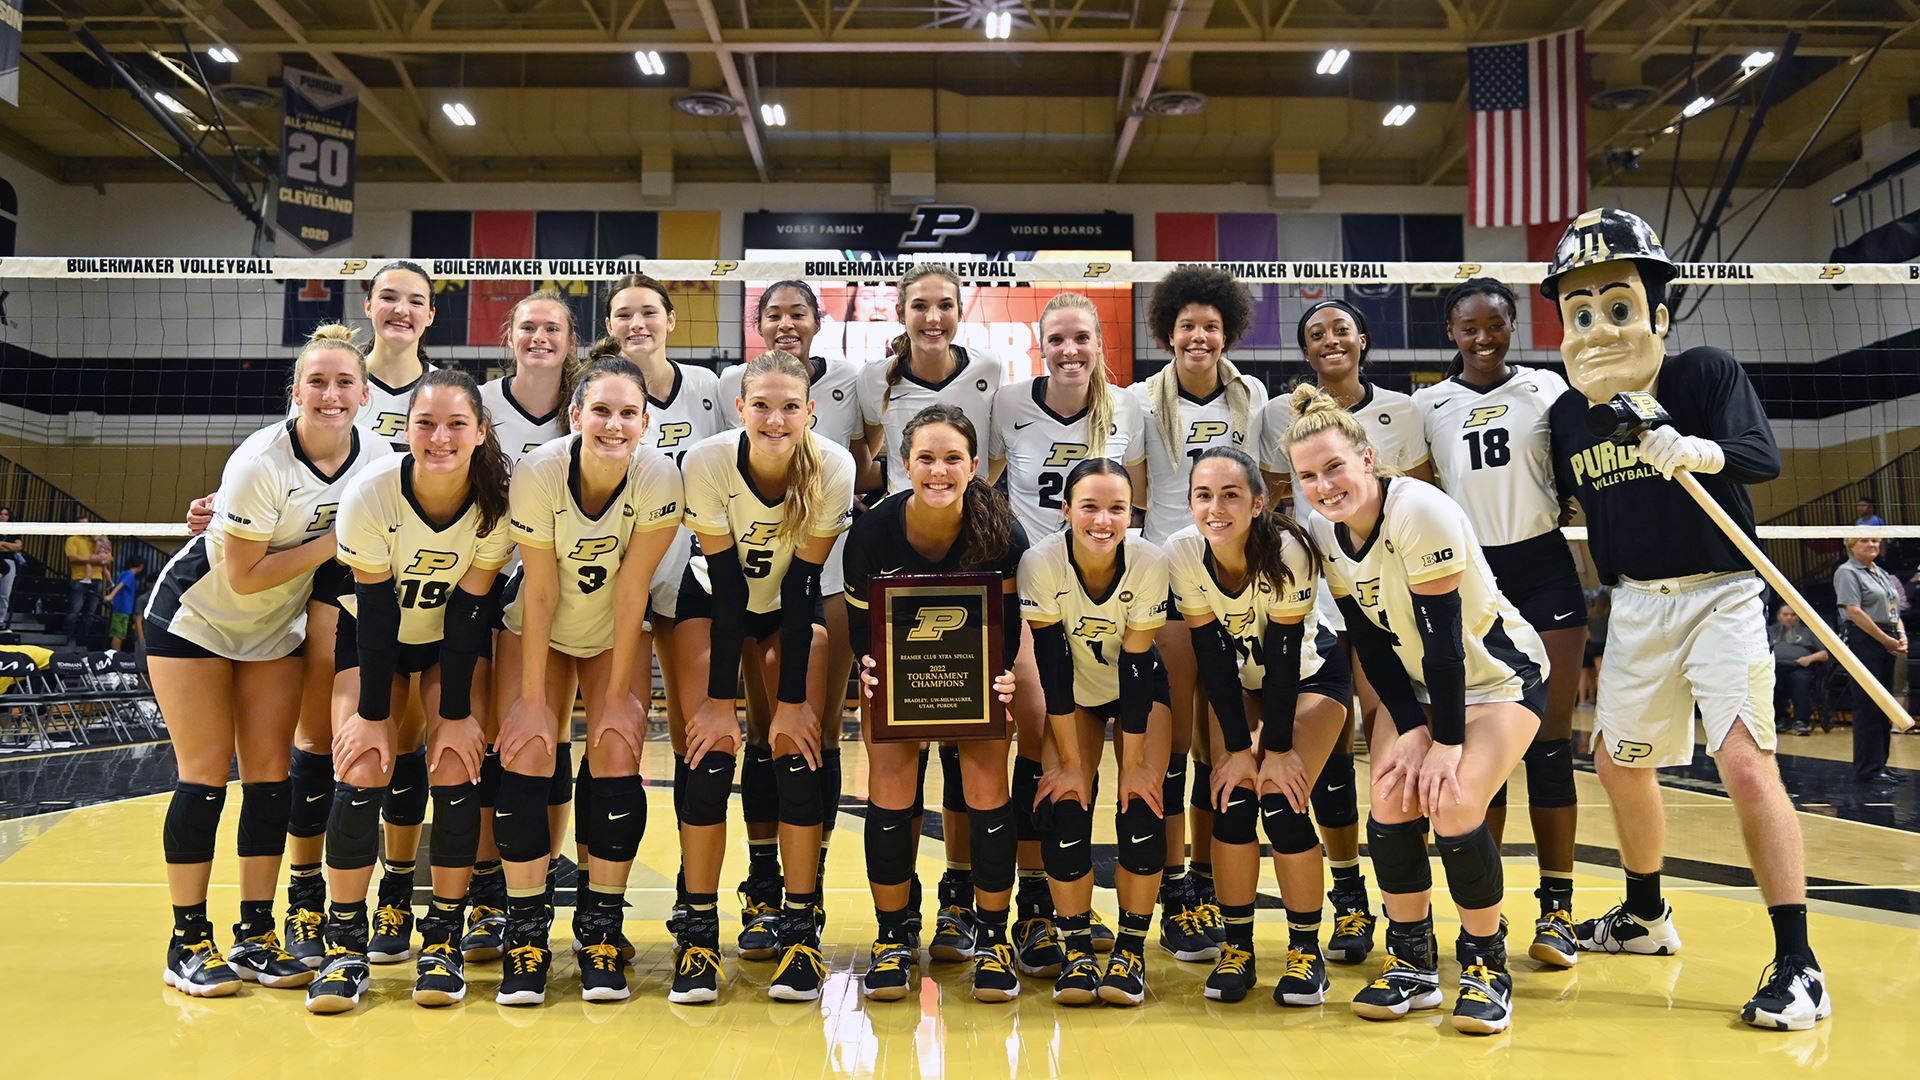 11th Ranked Purdue Volleyball Extends Perfect Start To 6-0